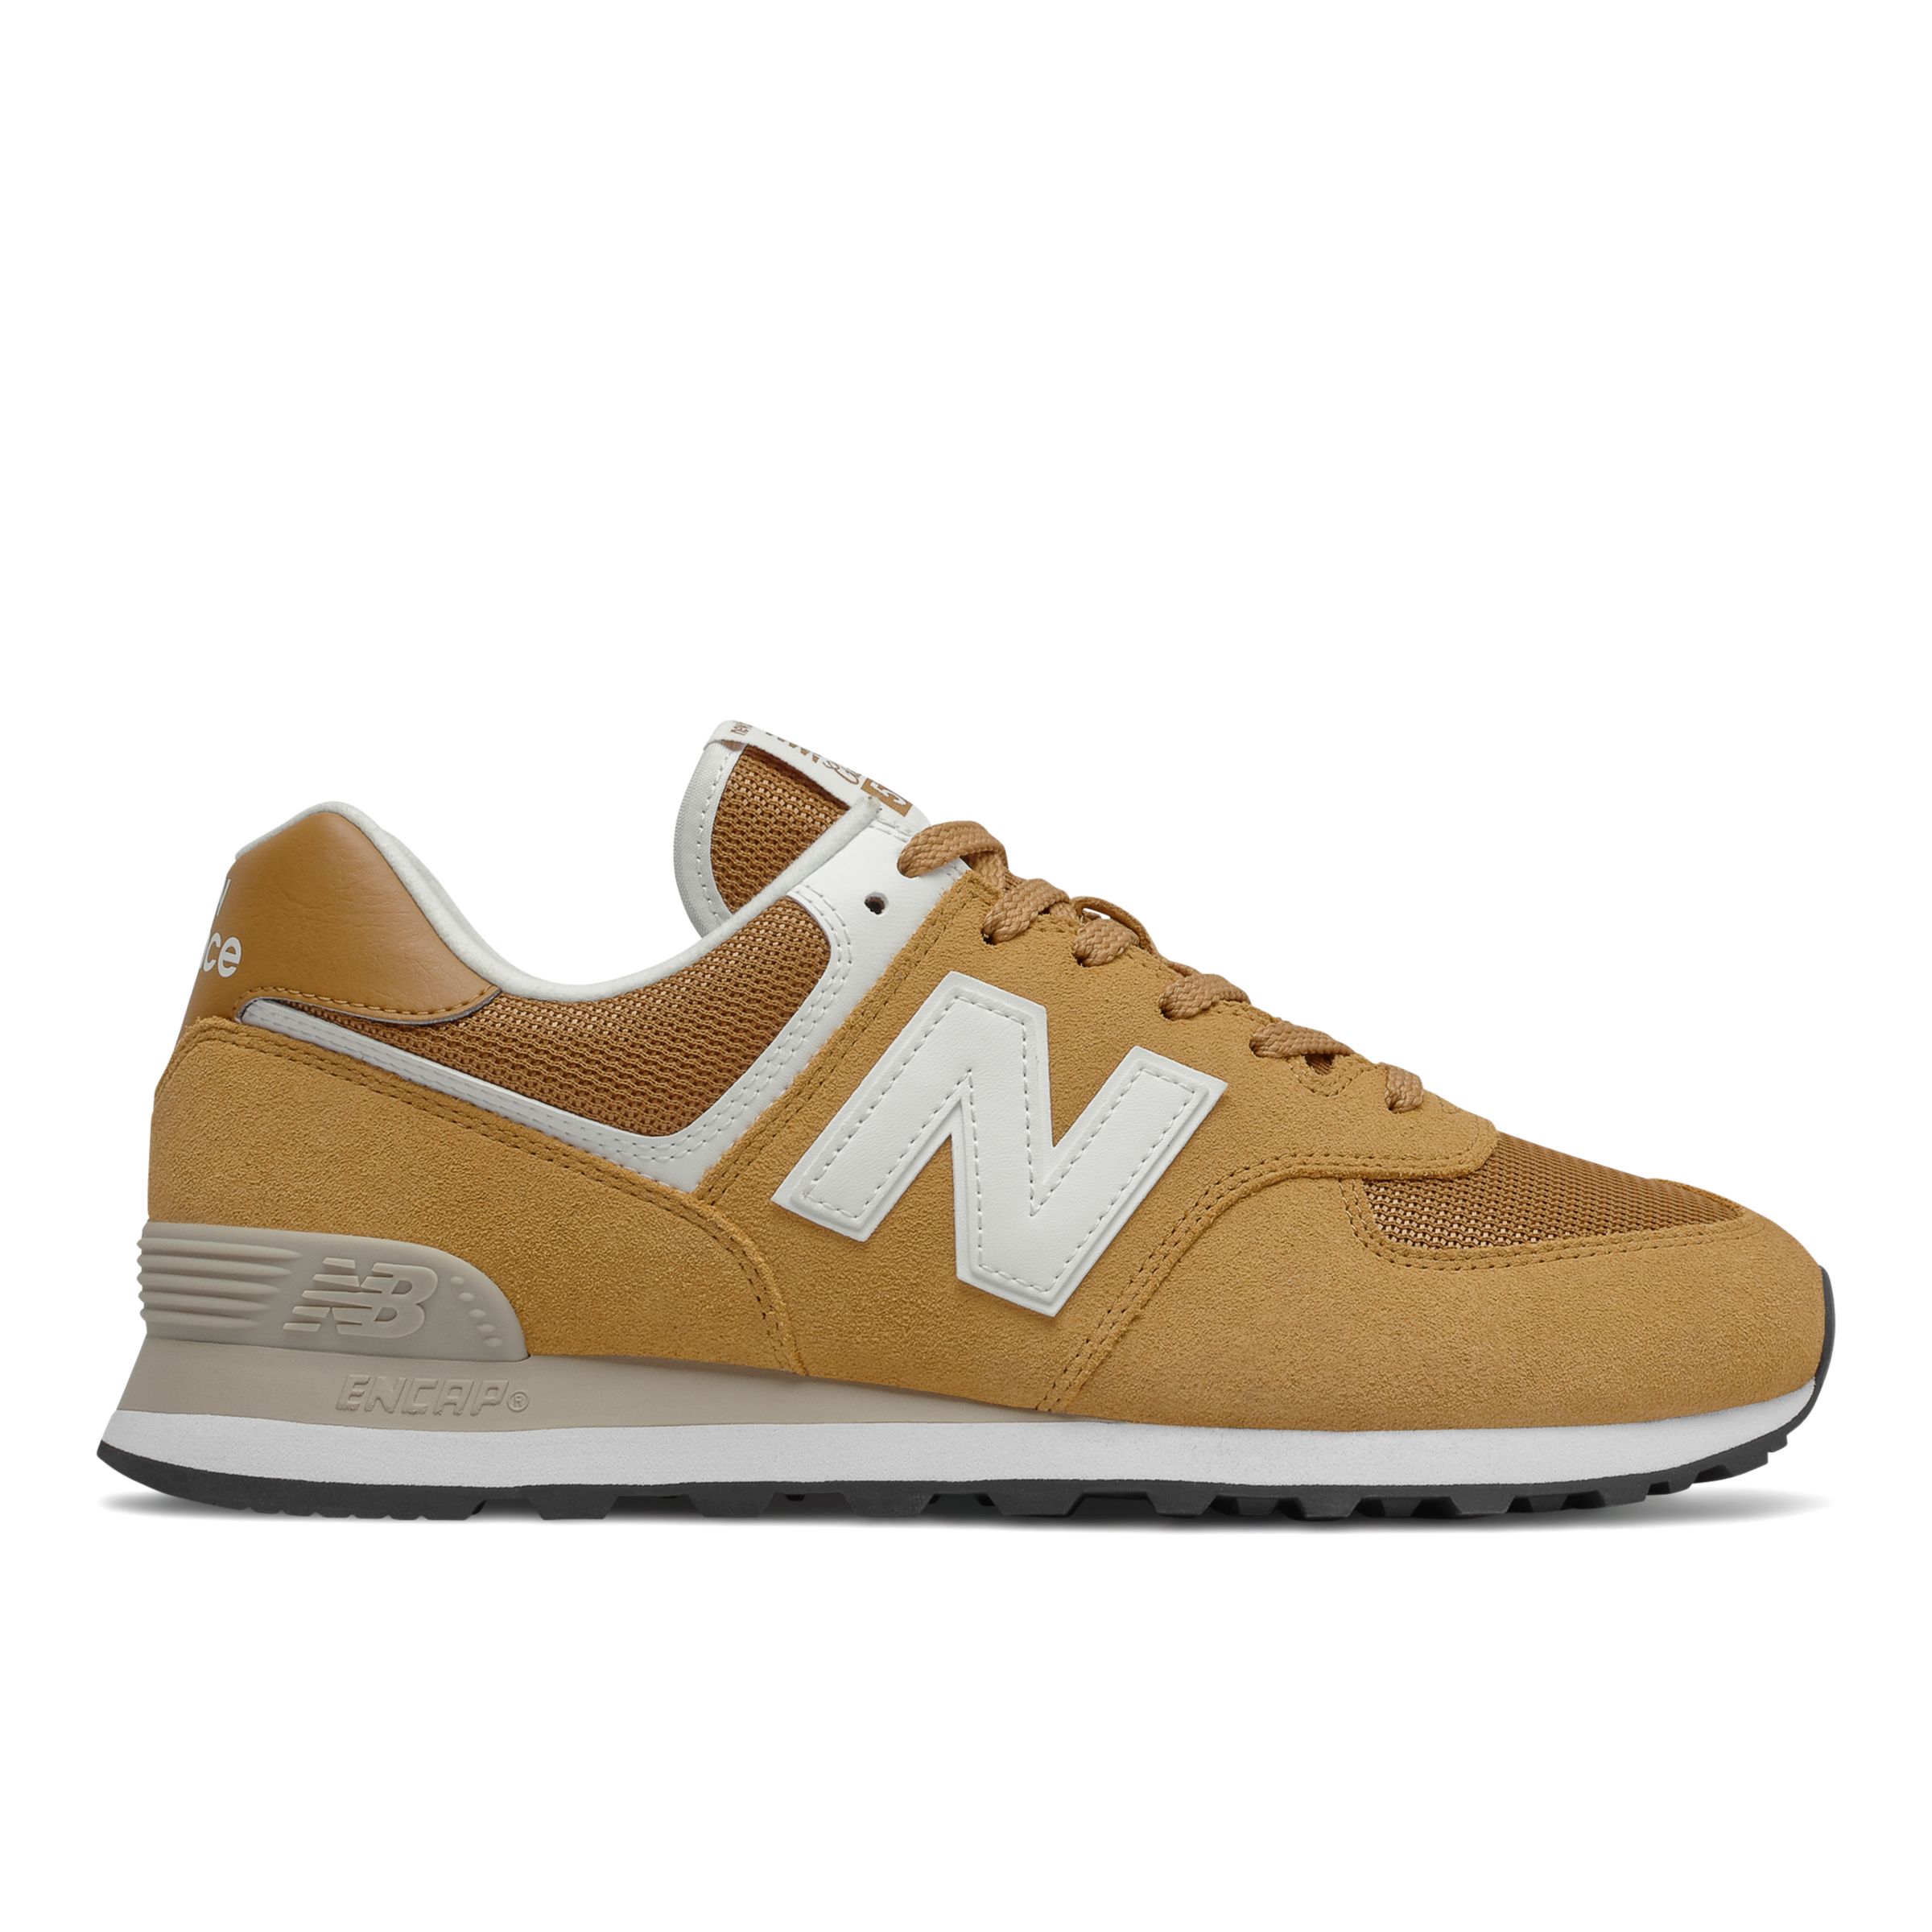 new balance 475 classic brown,OFF 59%,www.concordehotels.com.tr